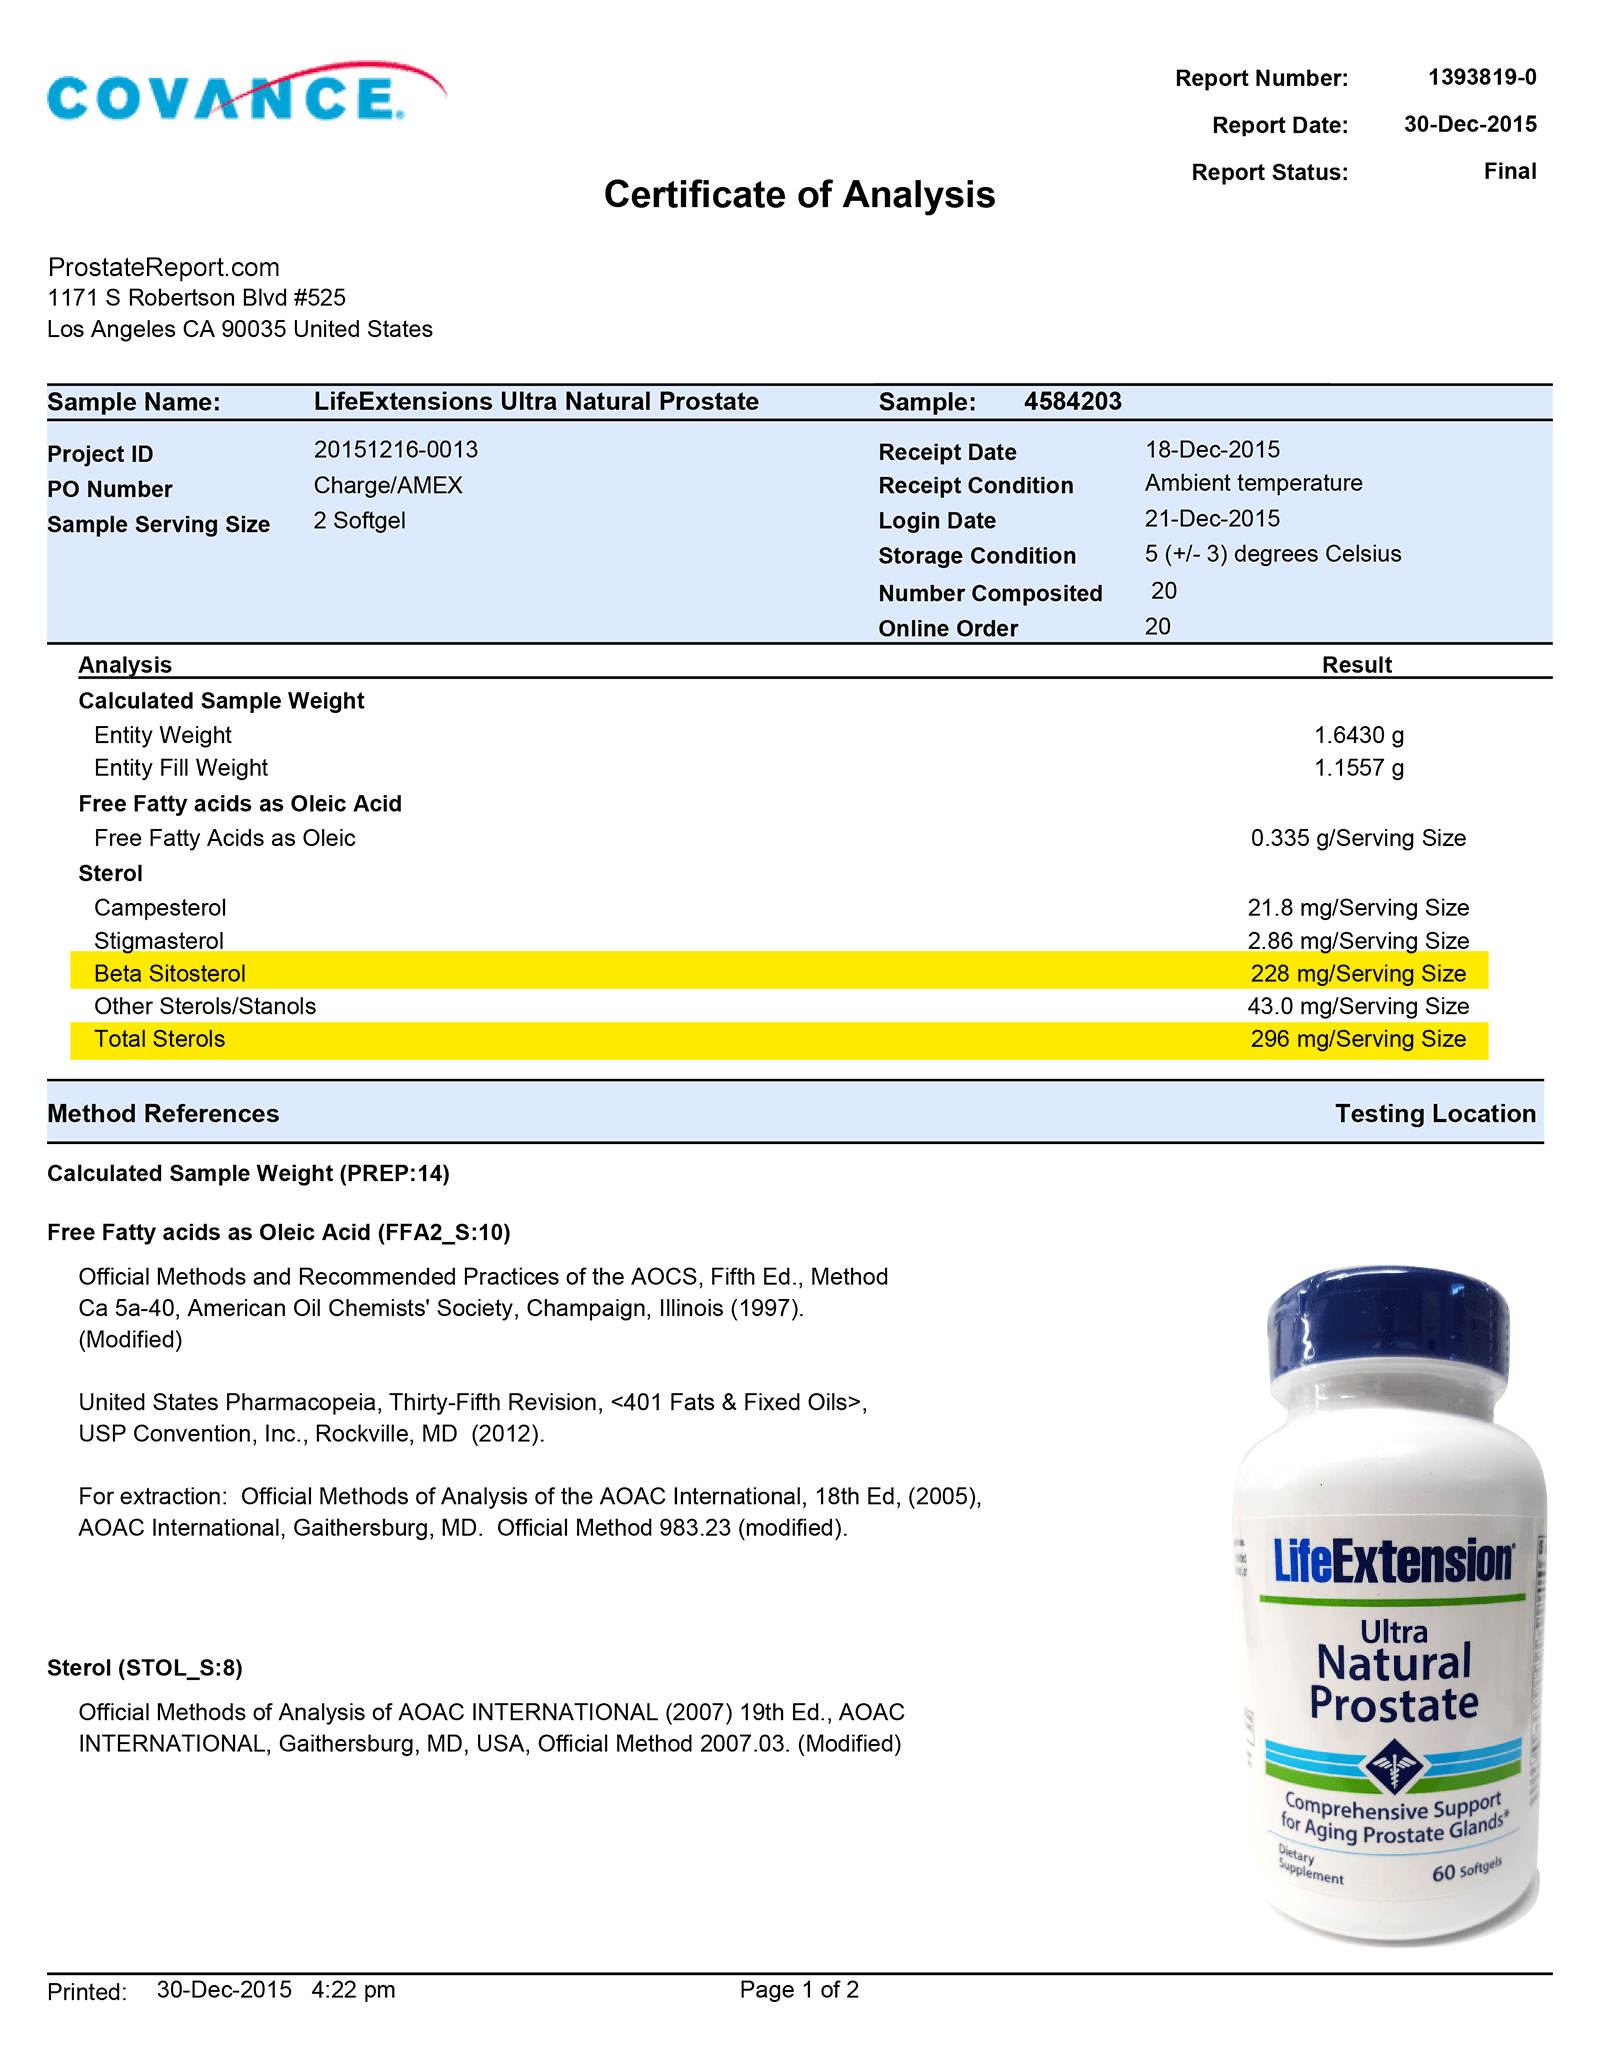 Ultra Natural Prostate lab report 